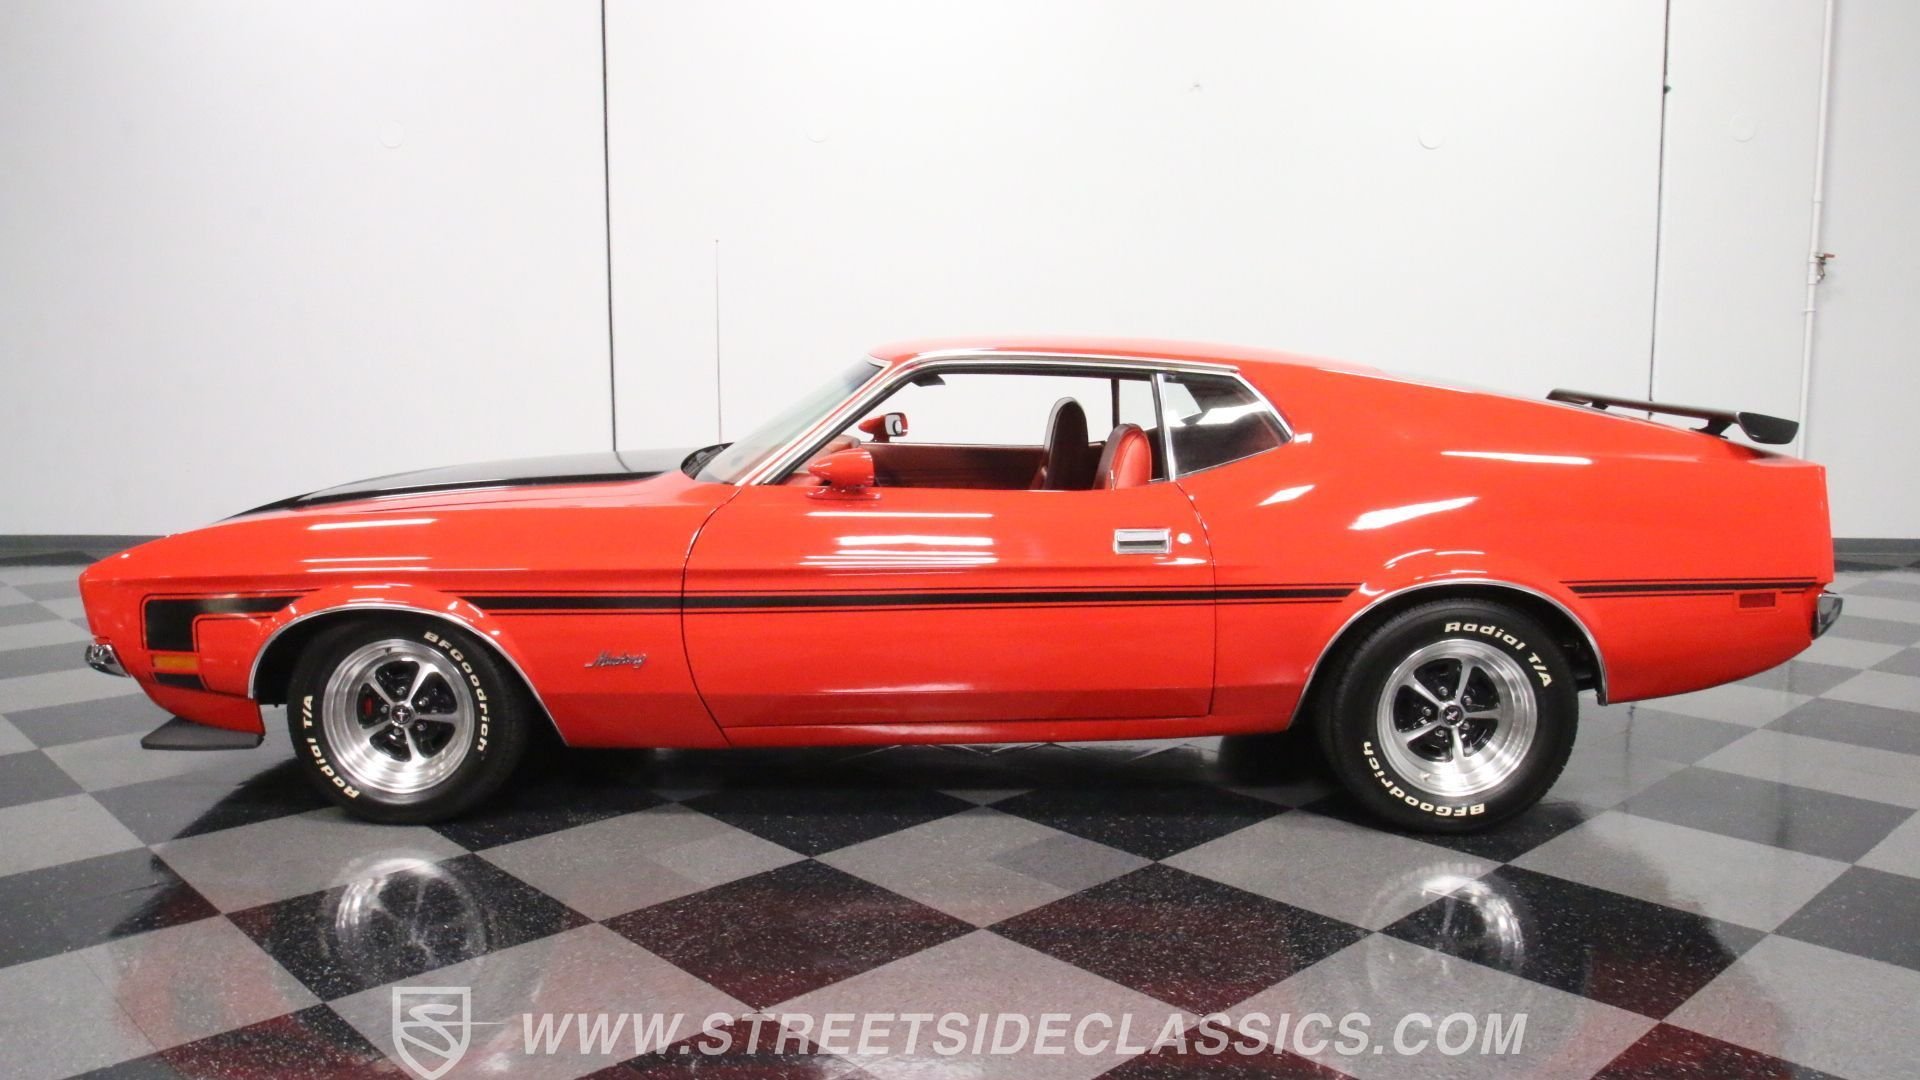 1972 Ford Mustang | Classic Cars for Sale - Streetside Classics